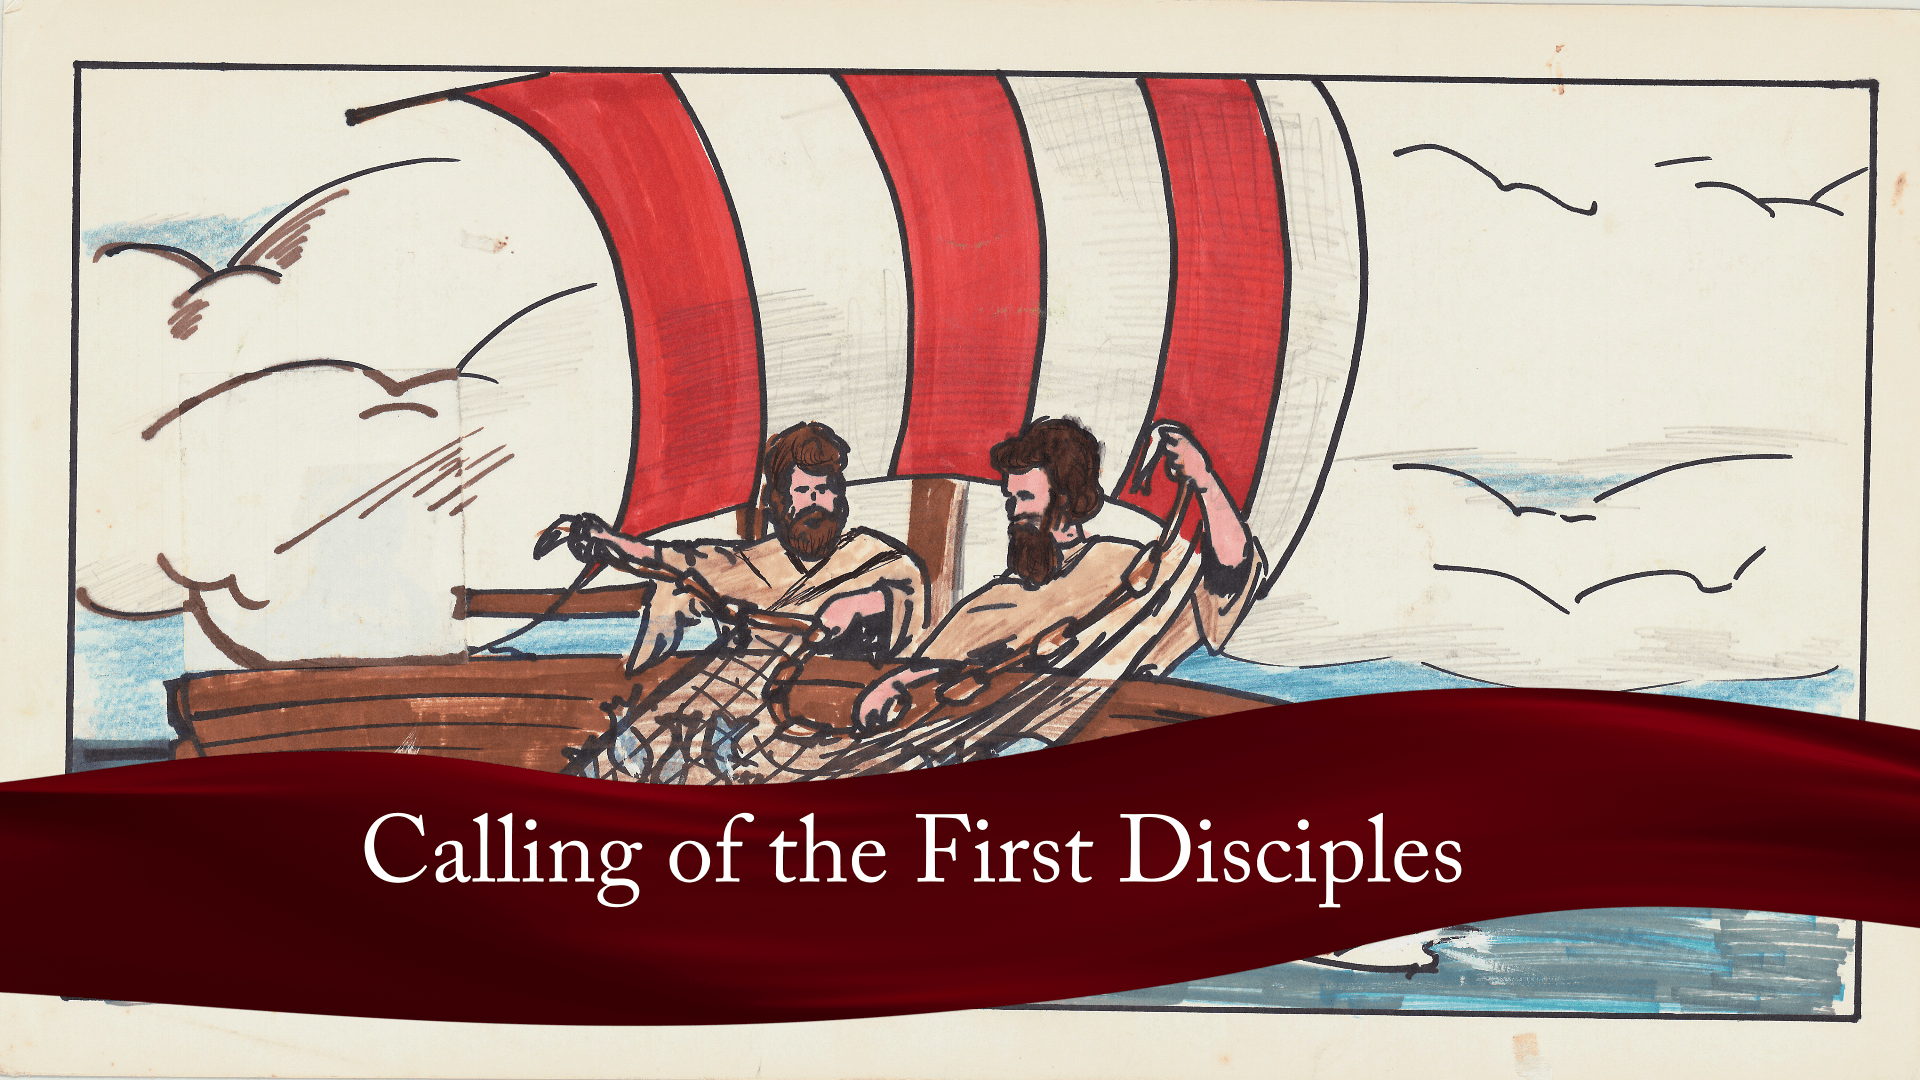 The Calling of the First Disciples